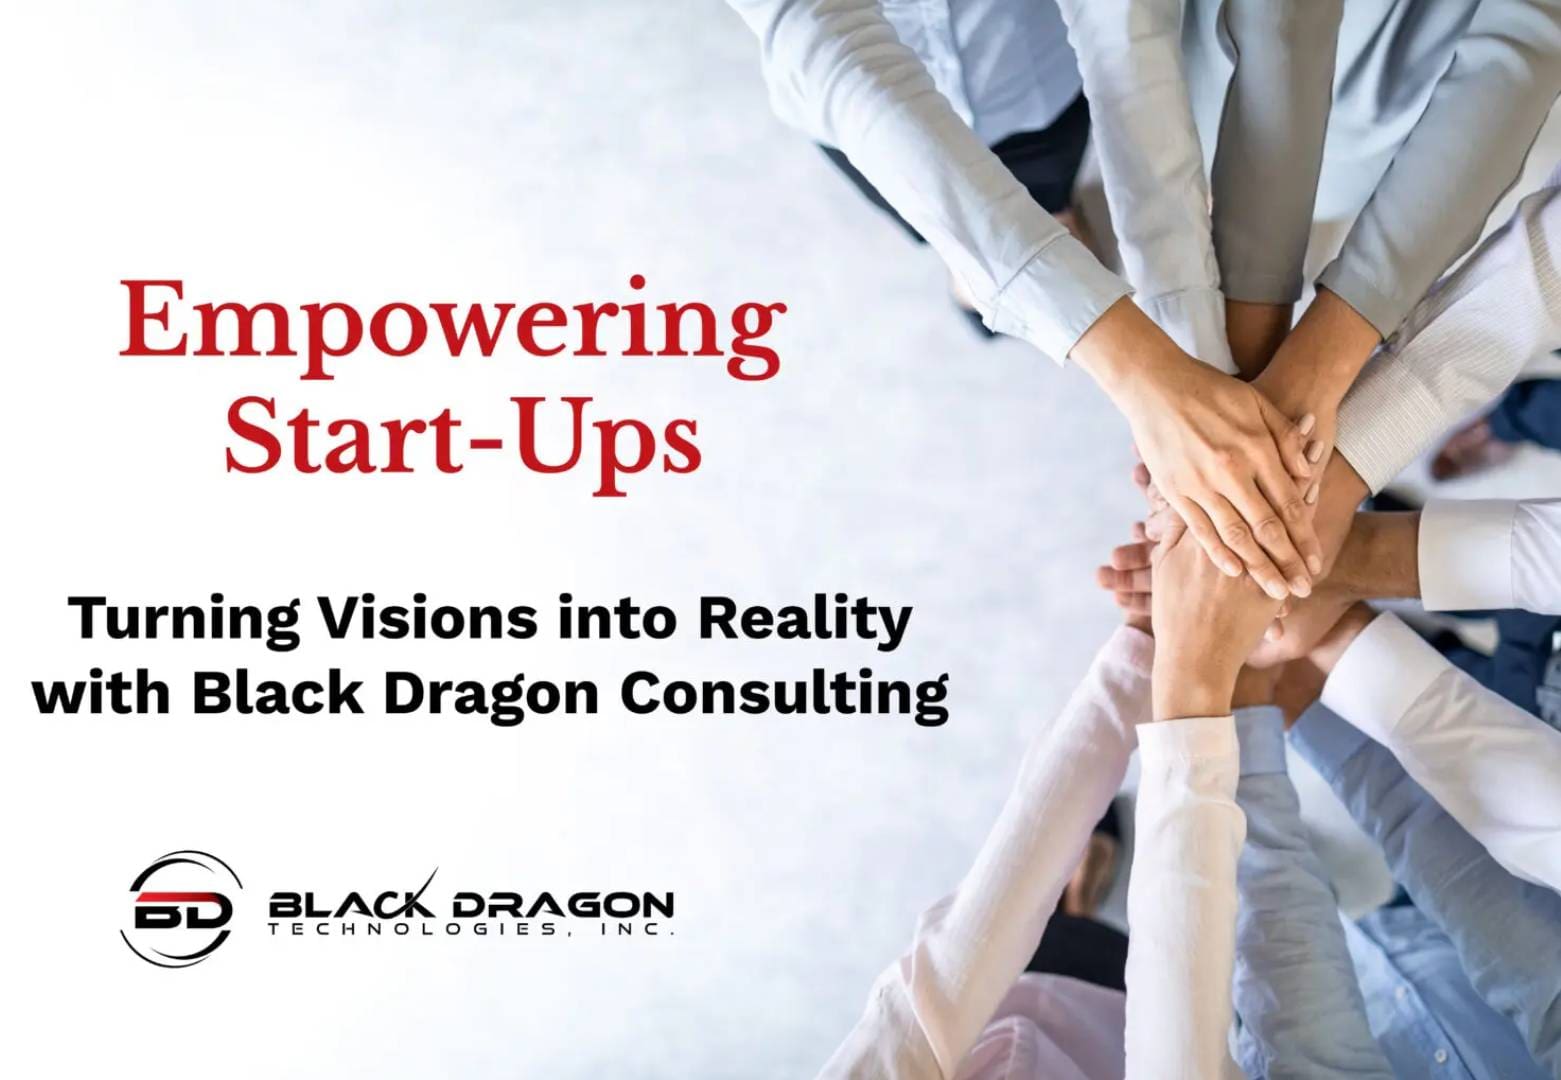 Empowering start ups turning into reality through expert Business Development Services provided by black dragon consulting.